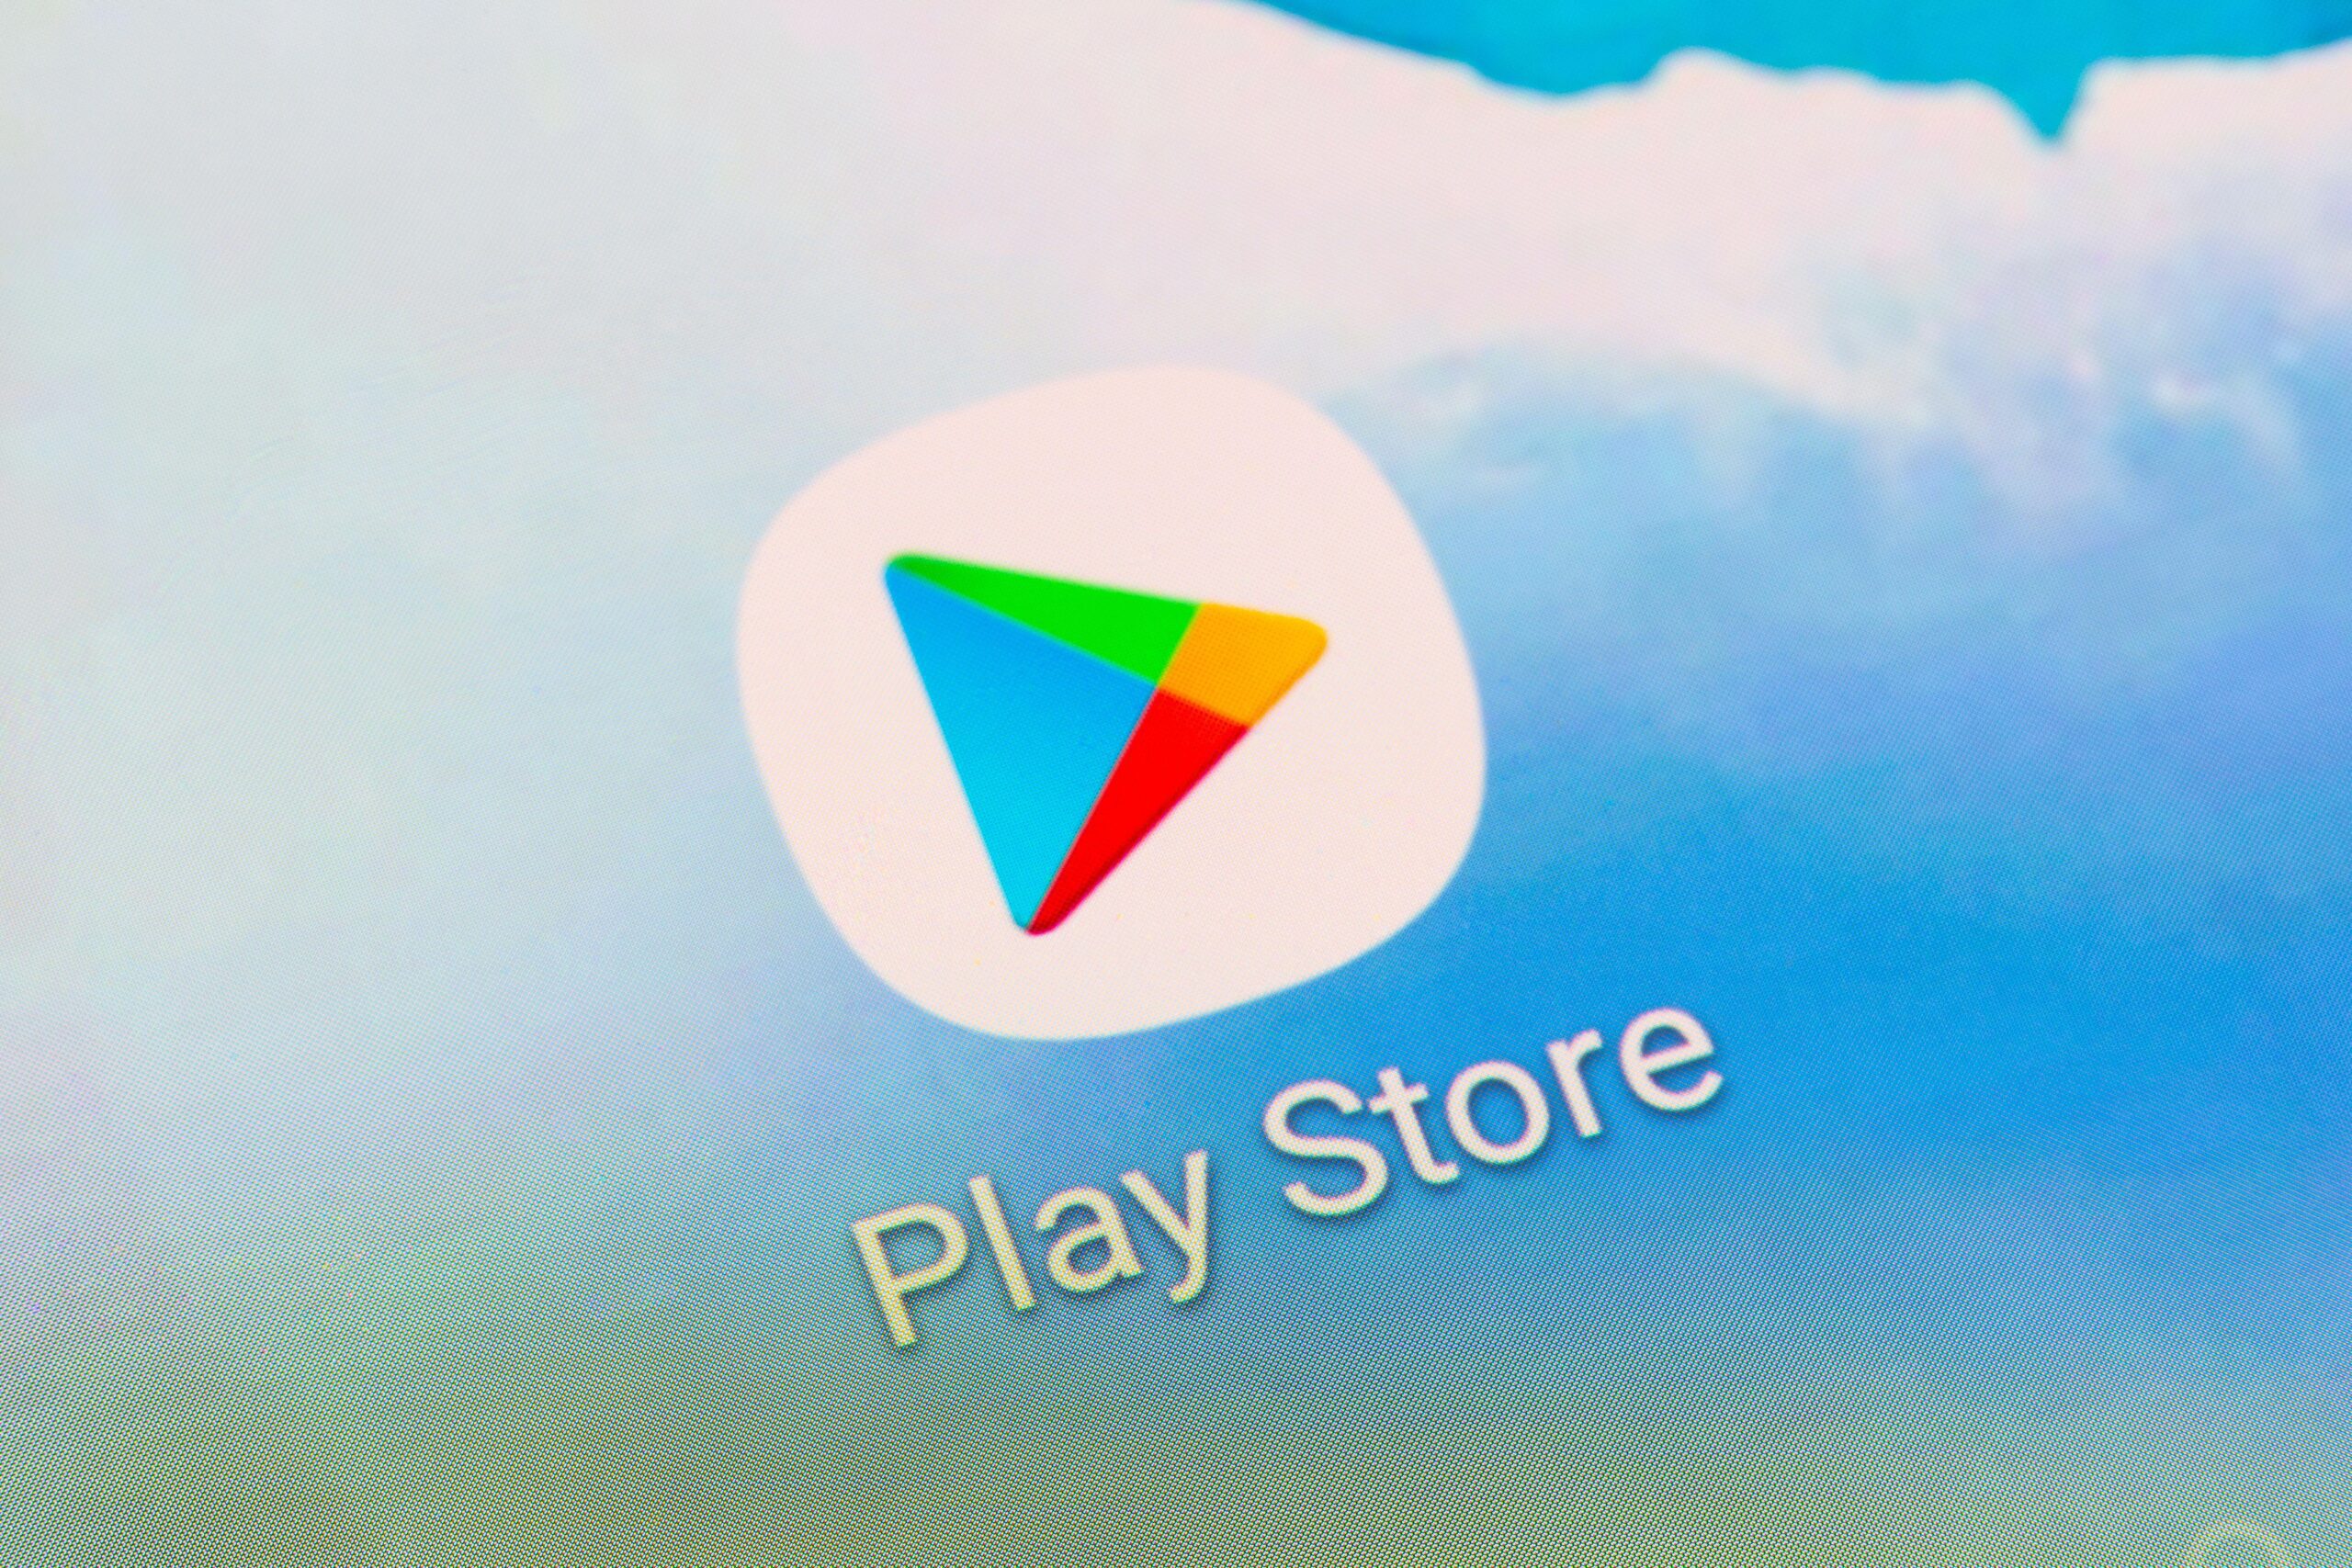 421M Spyware Apps Downloaded Through Google Play – Source: www.darkreading.com